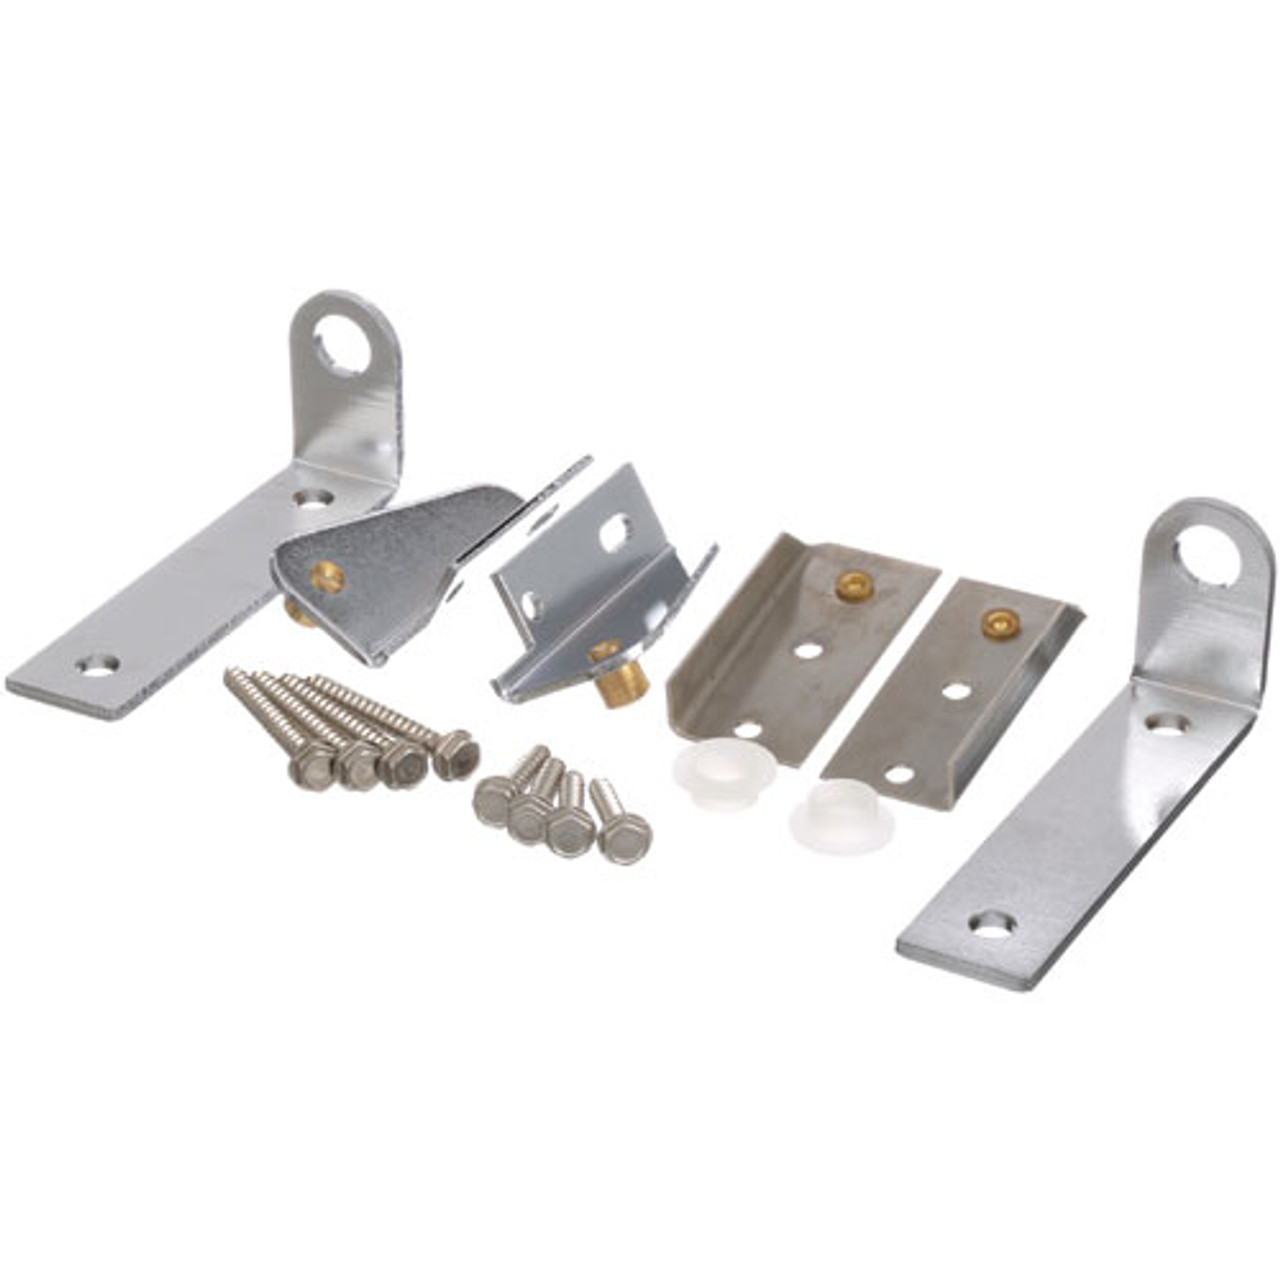 Hinge Kit - Replacement Part For Delfield 0160179